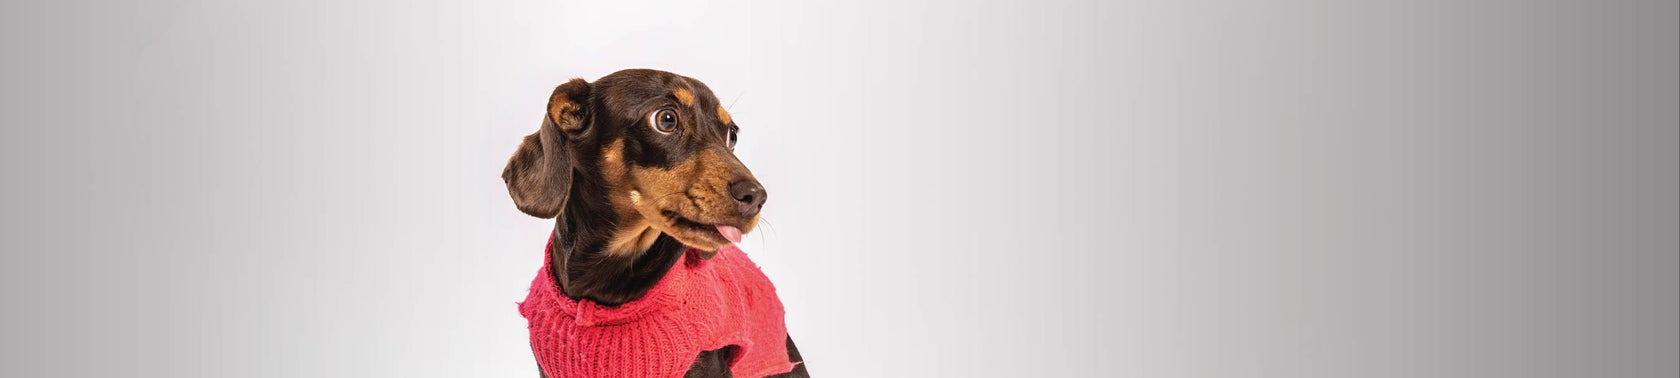 A sausage dog with a white background